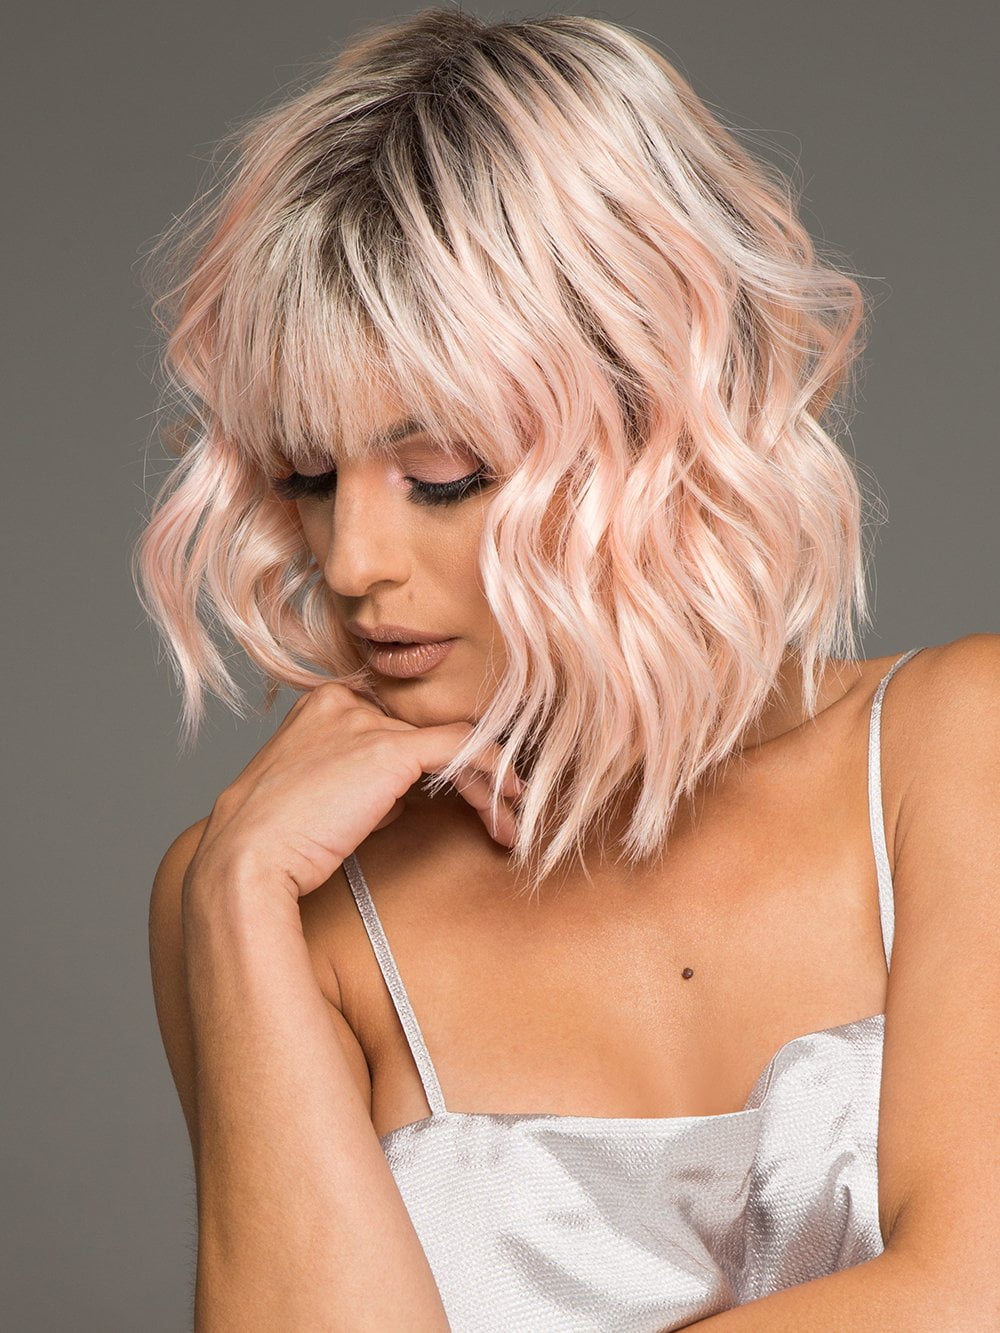 PEACHY KEEN by HAIRDO in PEACH | Light Peachy-Pink Rooted | The bangs were cut & customized for this photo